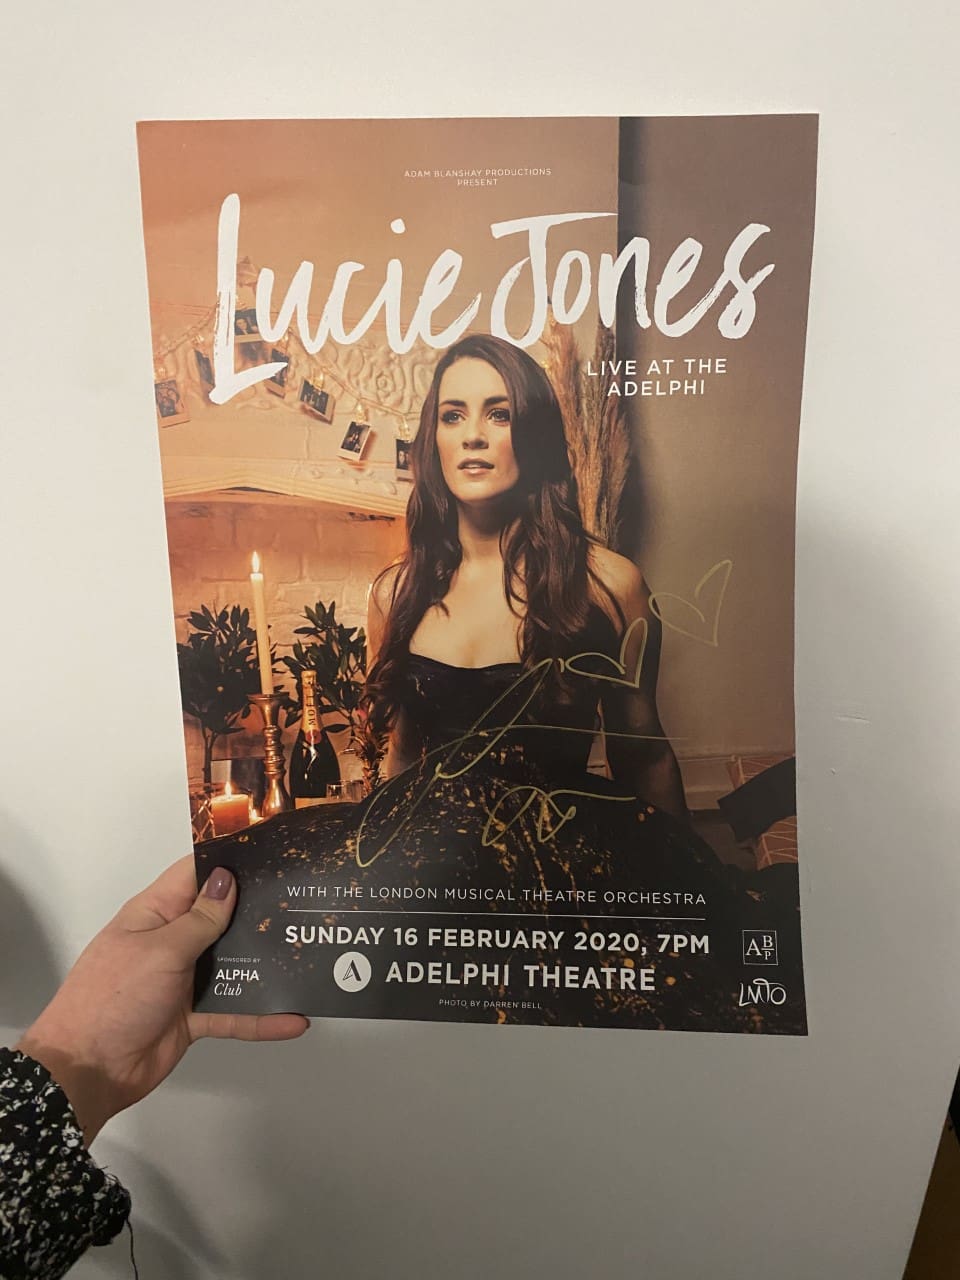 Enter our competition for a chance to win a poster signed by Lucie Jones